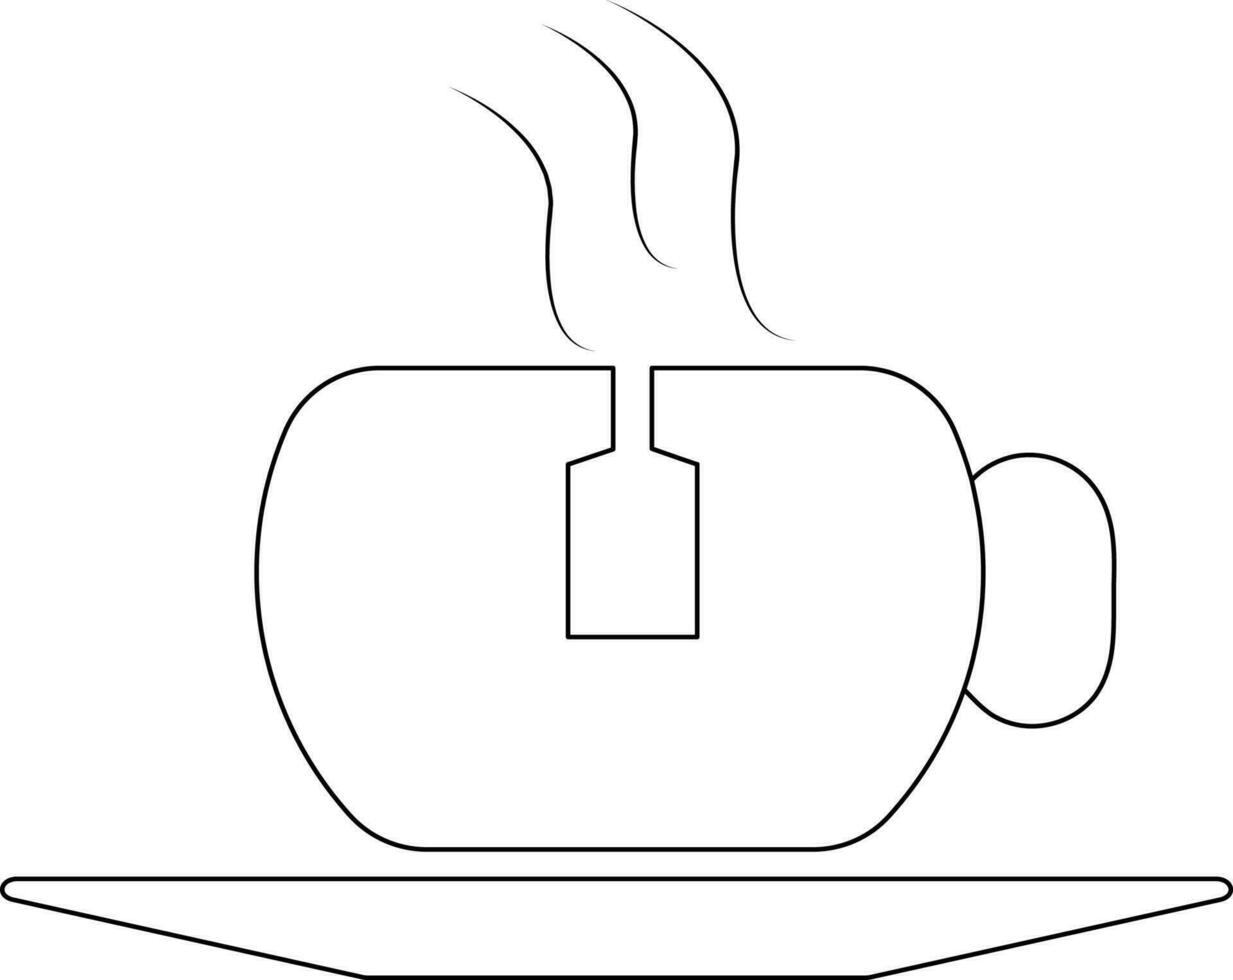 Tea bag and hot tea cup with plate in black line art illustration. vector